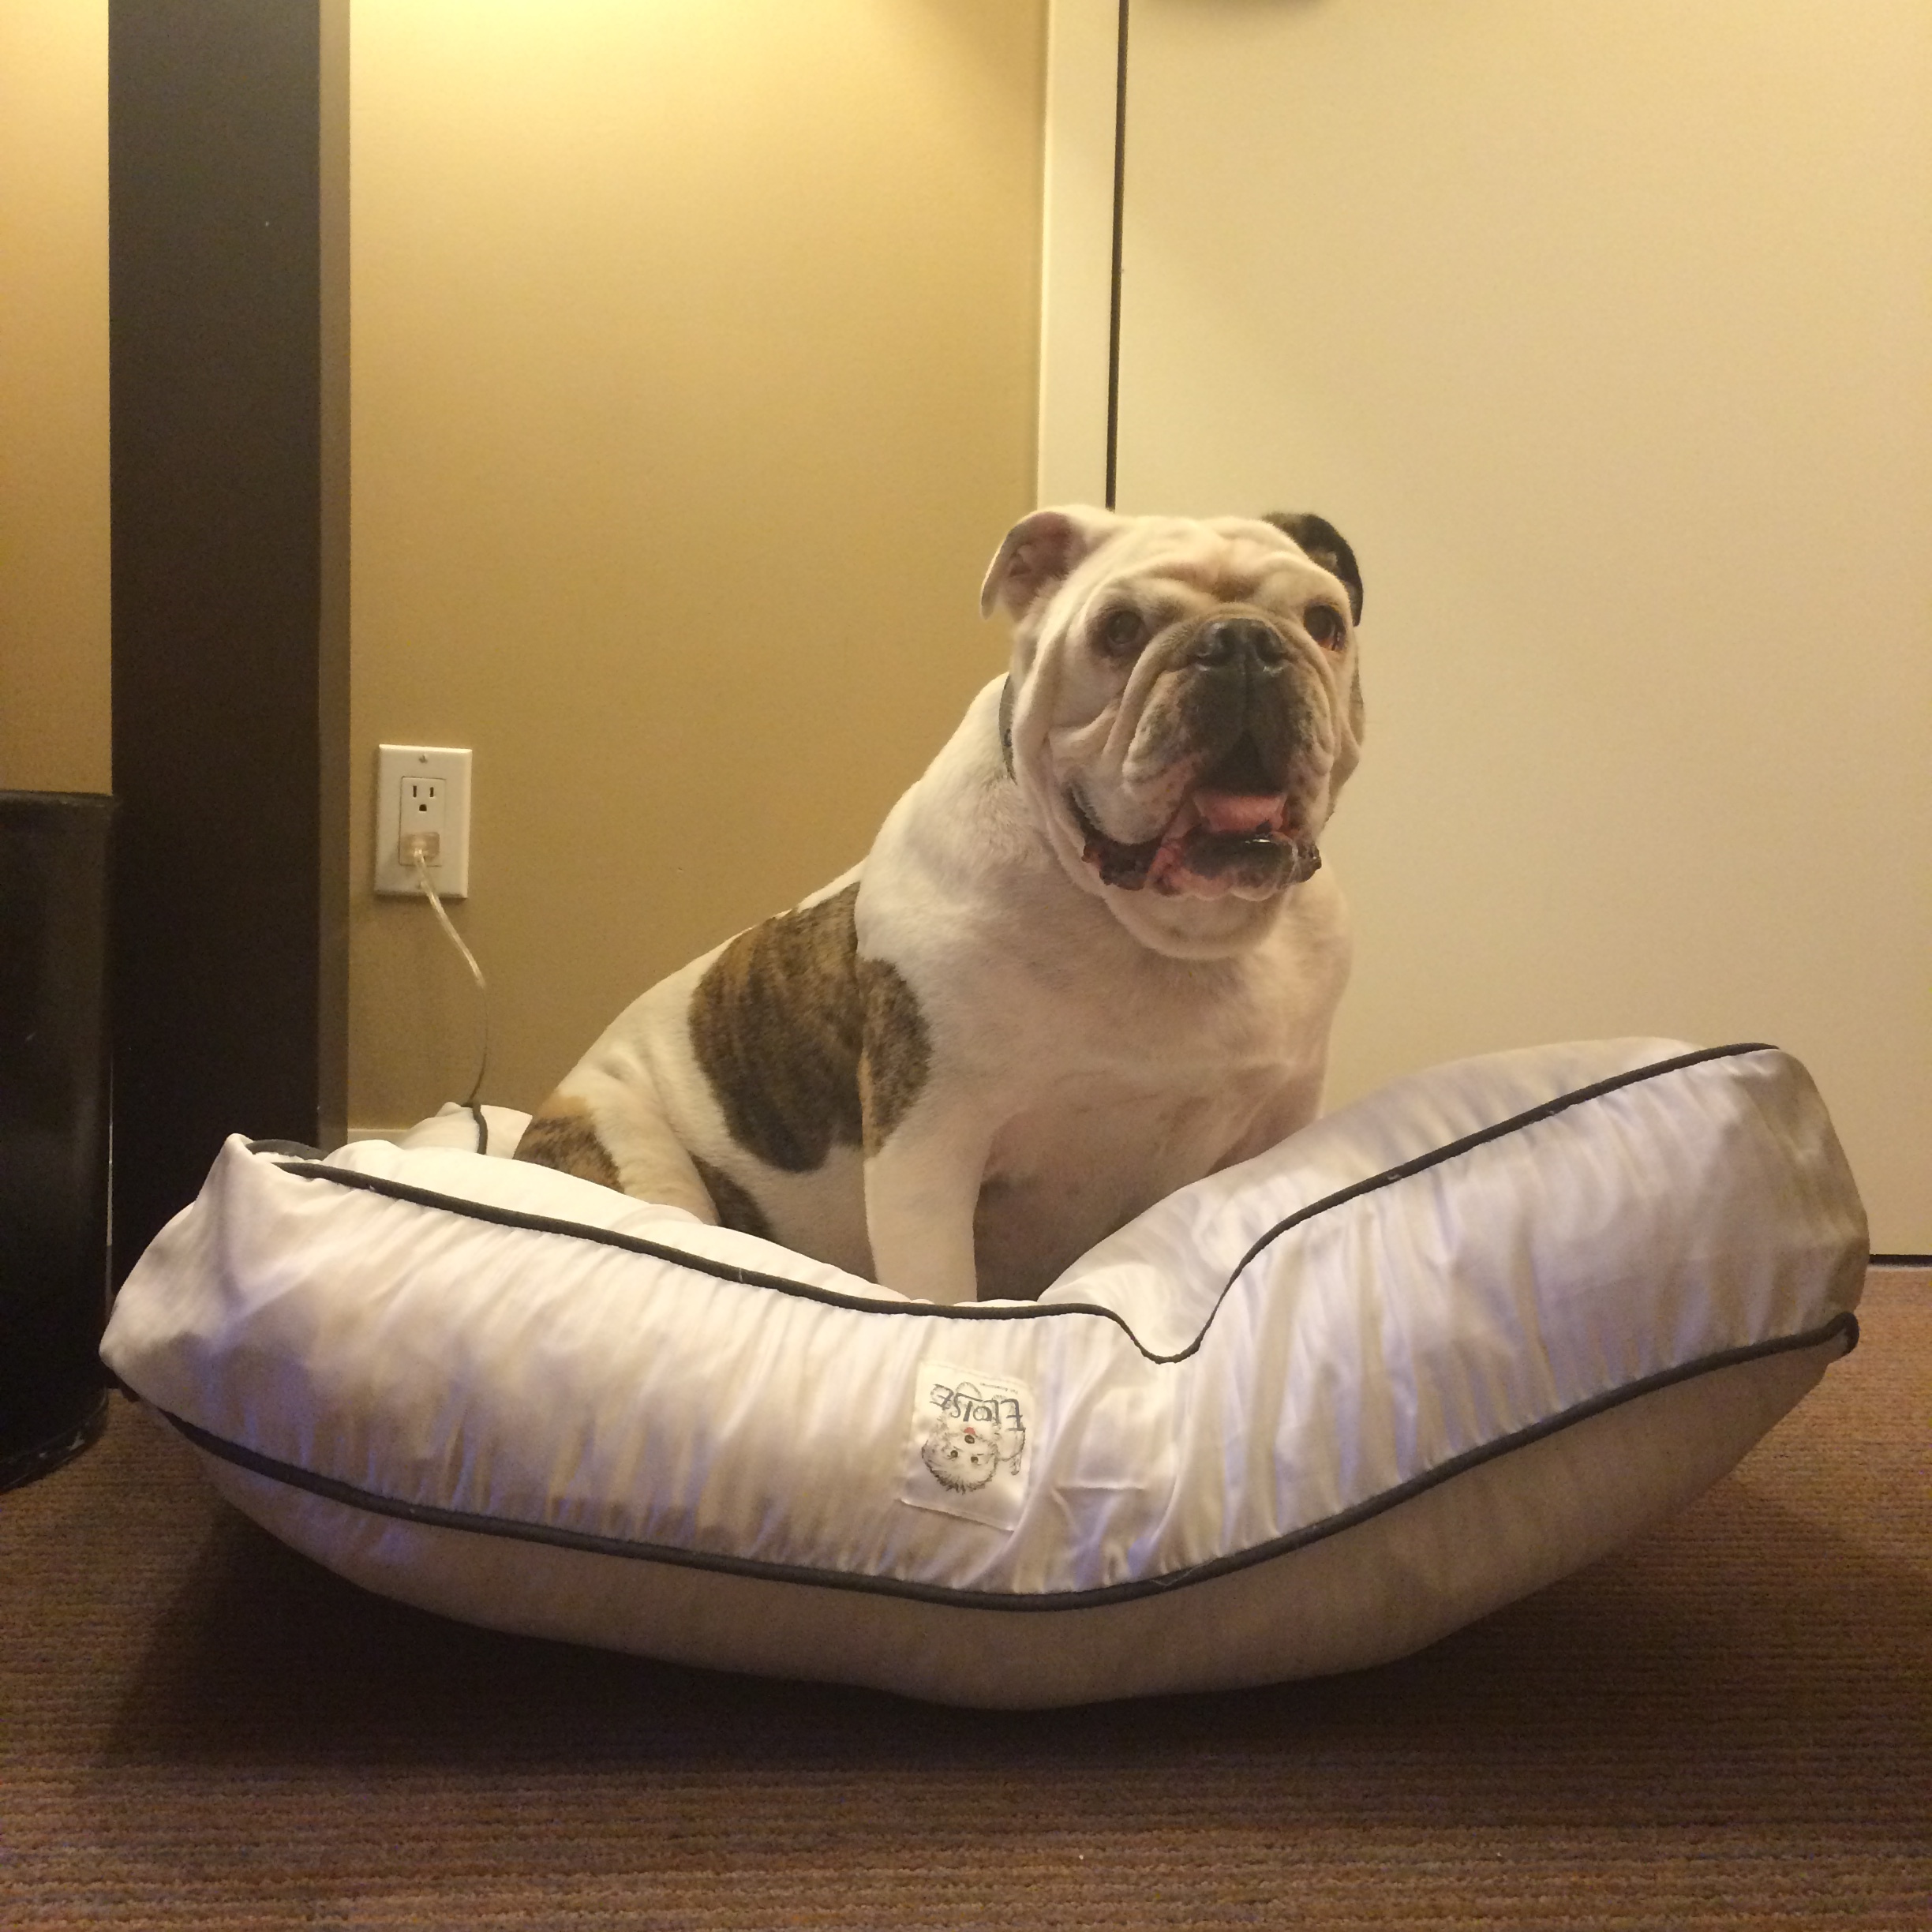 Heavenly Dog Bed just for me!